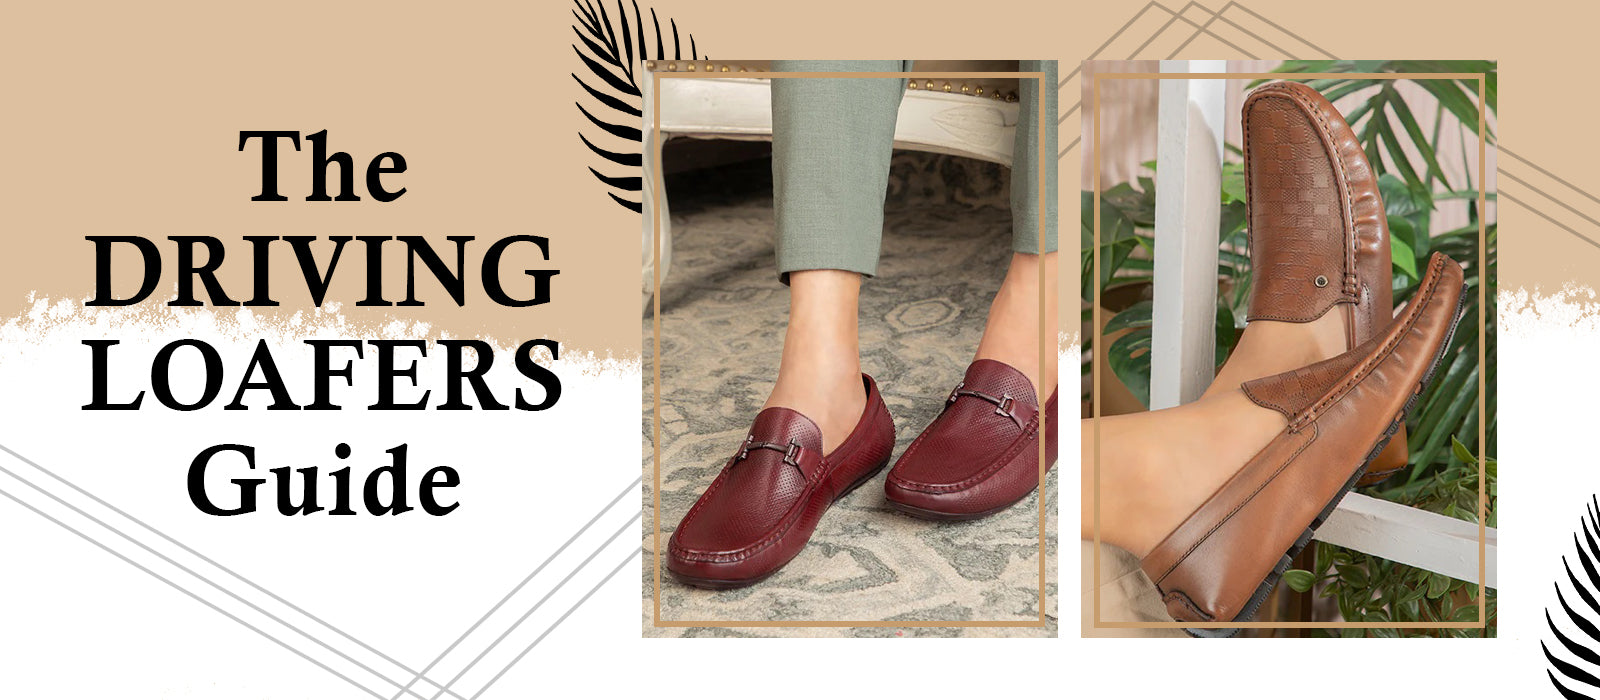 5 Reasons Why Every Man Should Own Driving Loafers